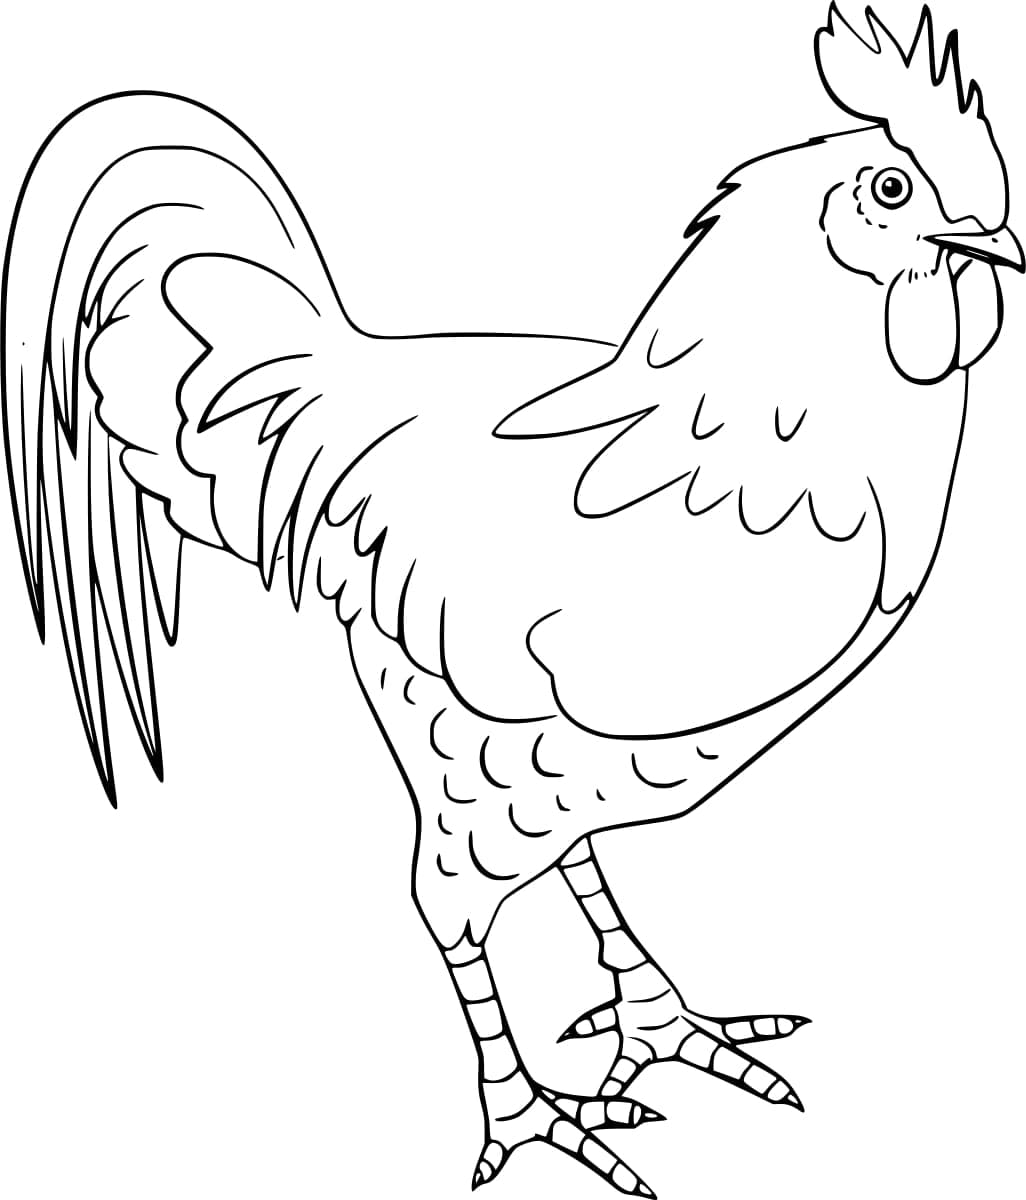 Coq Ordinaire coloring page